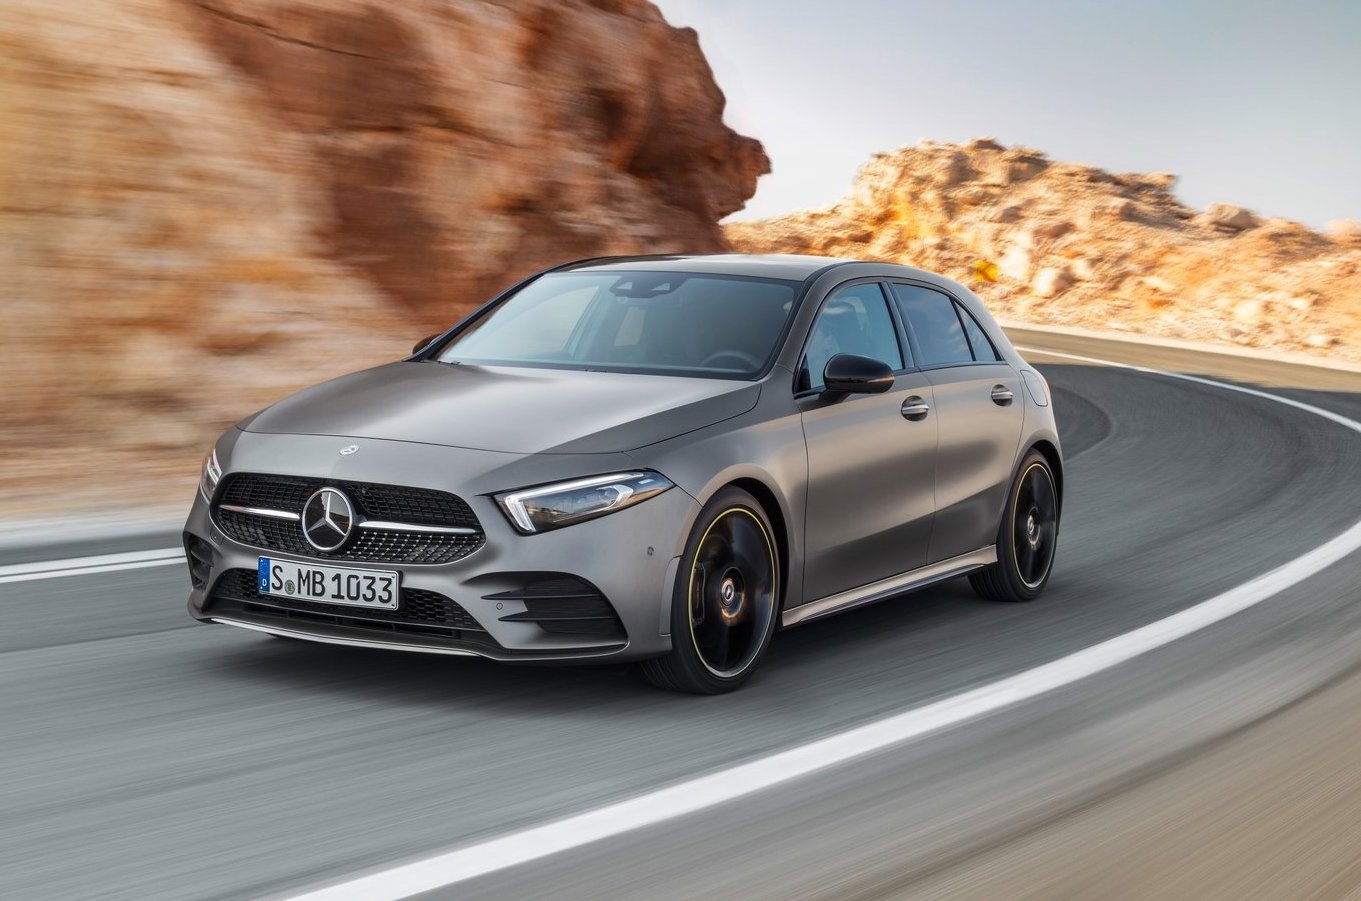 Mercedes-Benz A-Class & B-Class to be killed off in 2025 – report